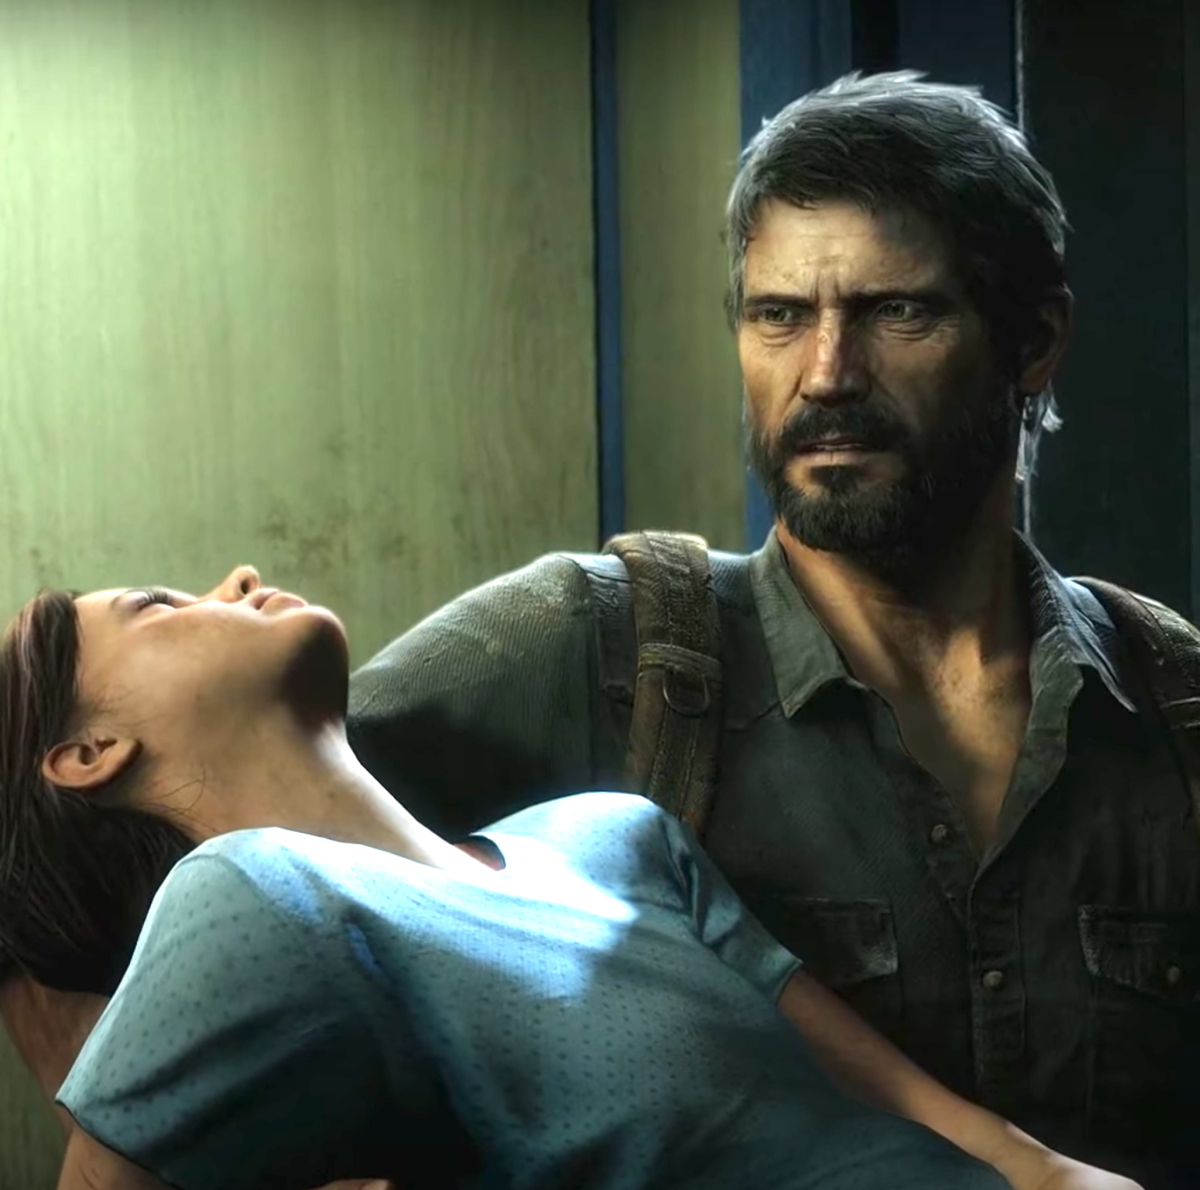 The Last of Us Season 1 Ending Explained: How Finale Differs from